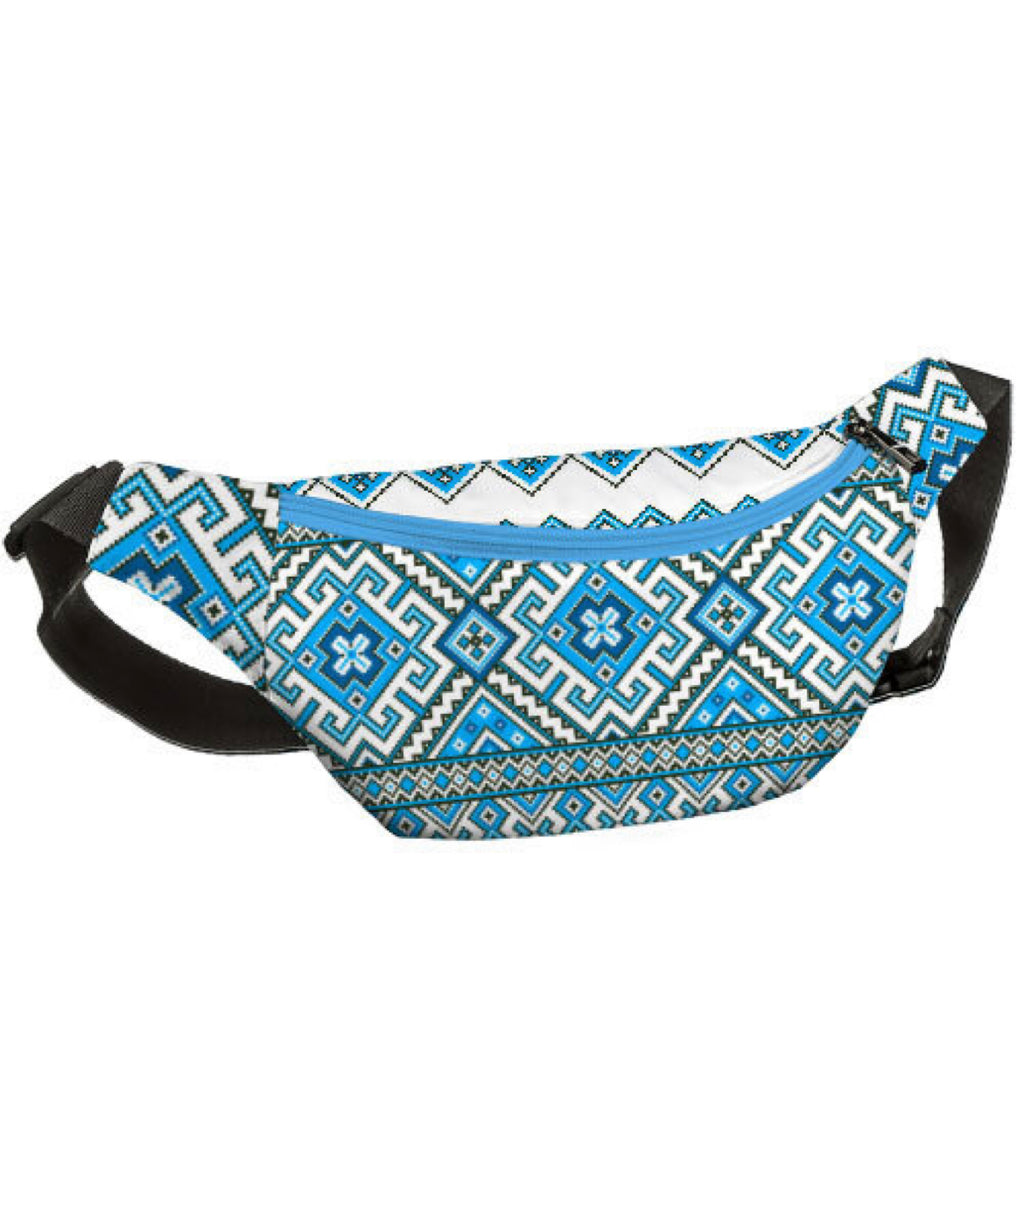 Bumbag “Blue Embroidery”